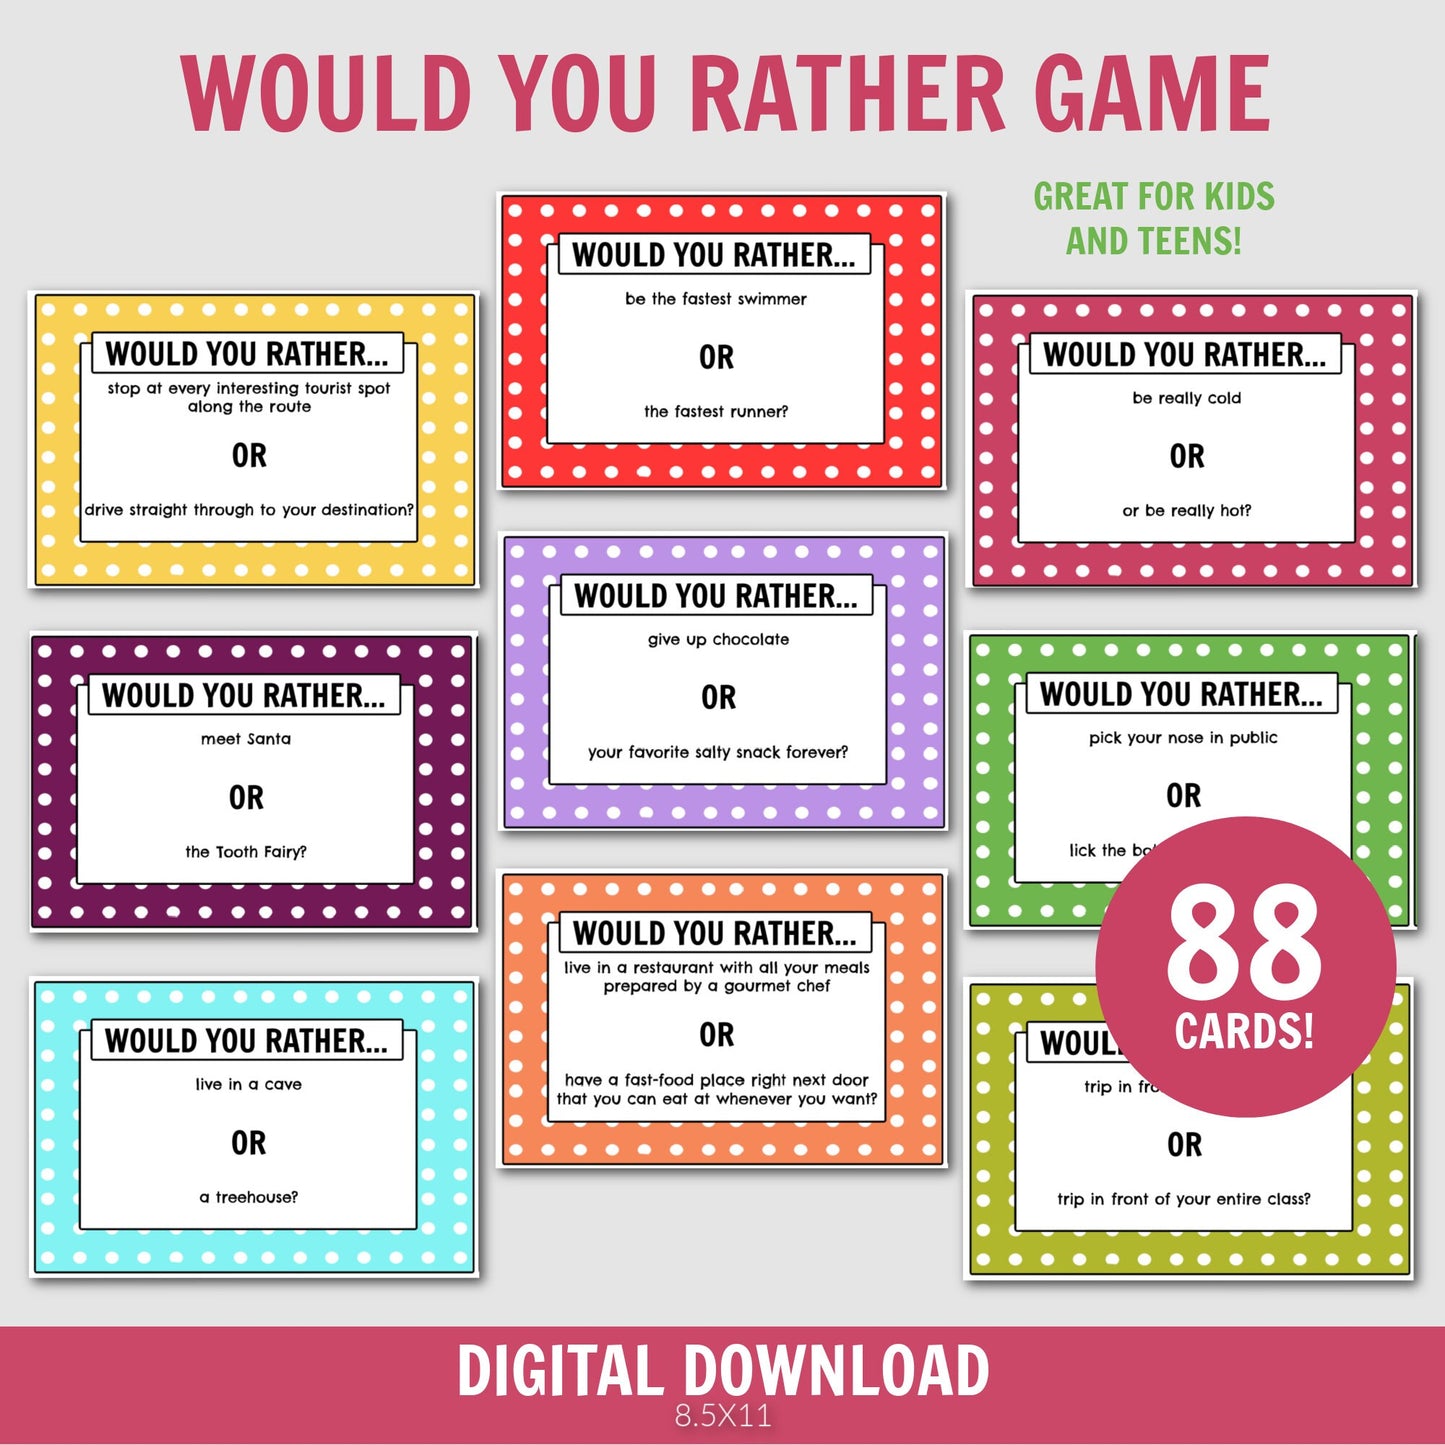 Would You Rather Game for Kids and Teens, Conversation Starters, Would You Rather Cards, Road Trip Games, Family Game, Kids Game